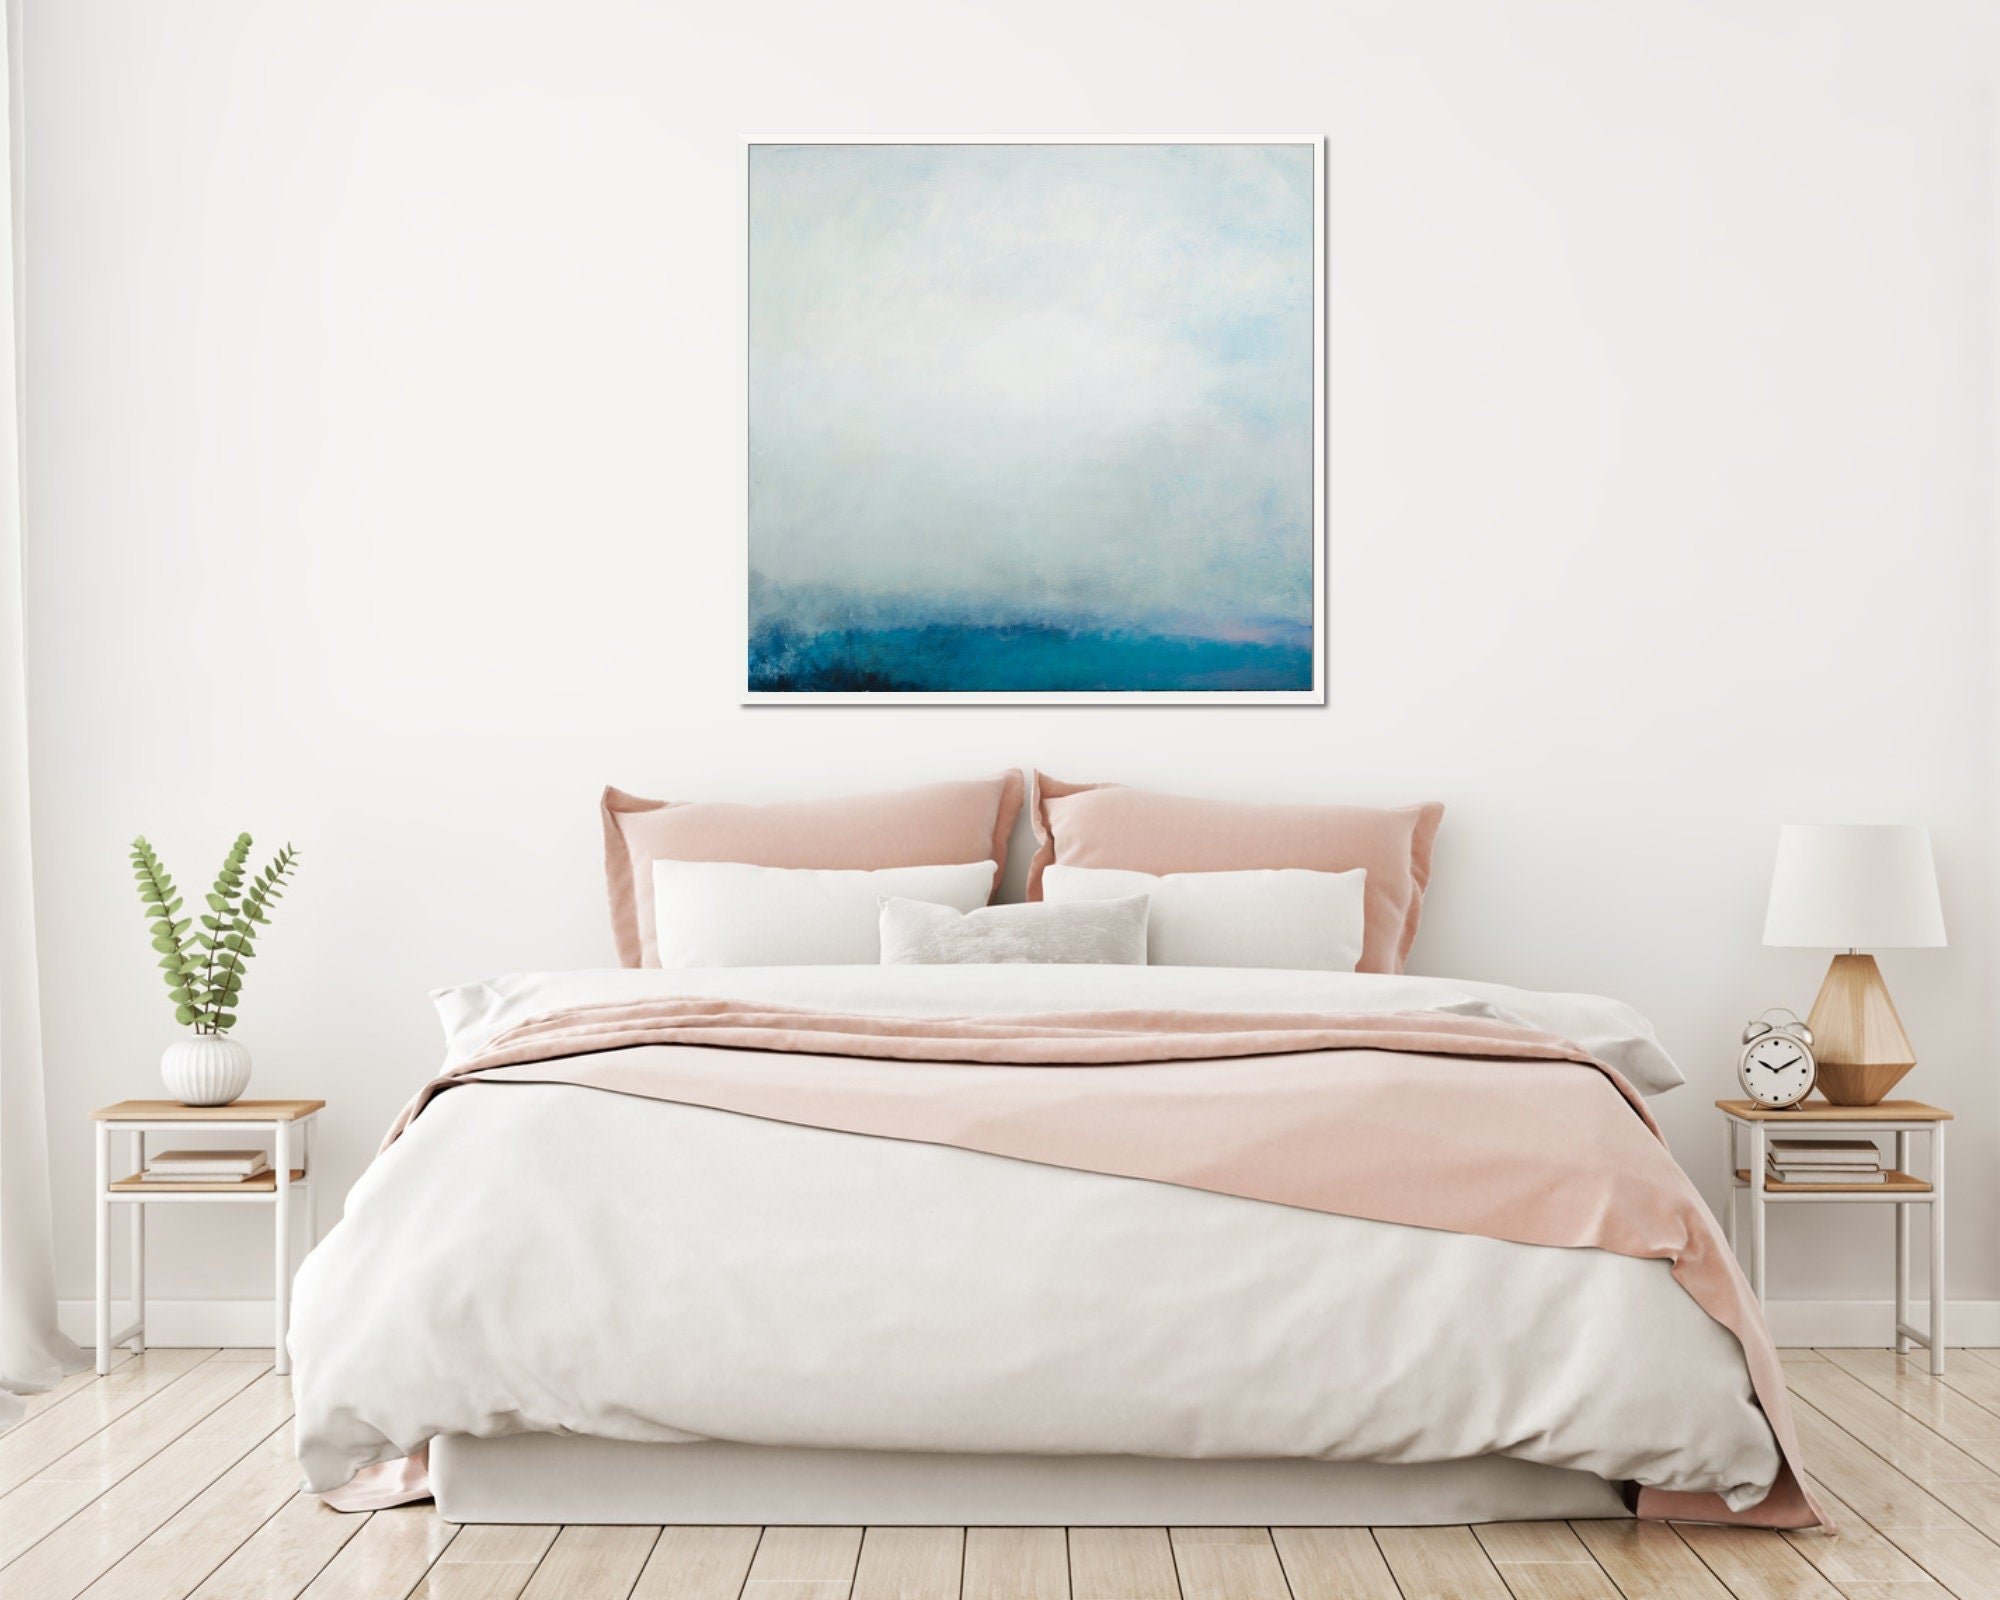 Teal wall art abstract painting, large wall art, gallery wall, wall art canvas, Pink abstract art, Landscape painting by Camilo Mattis